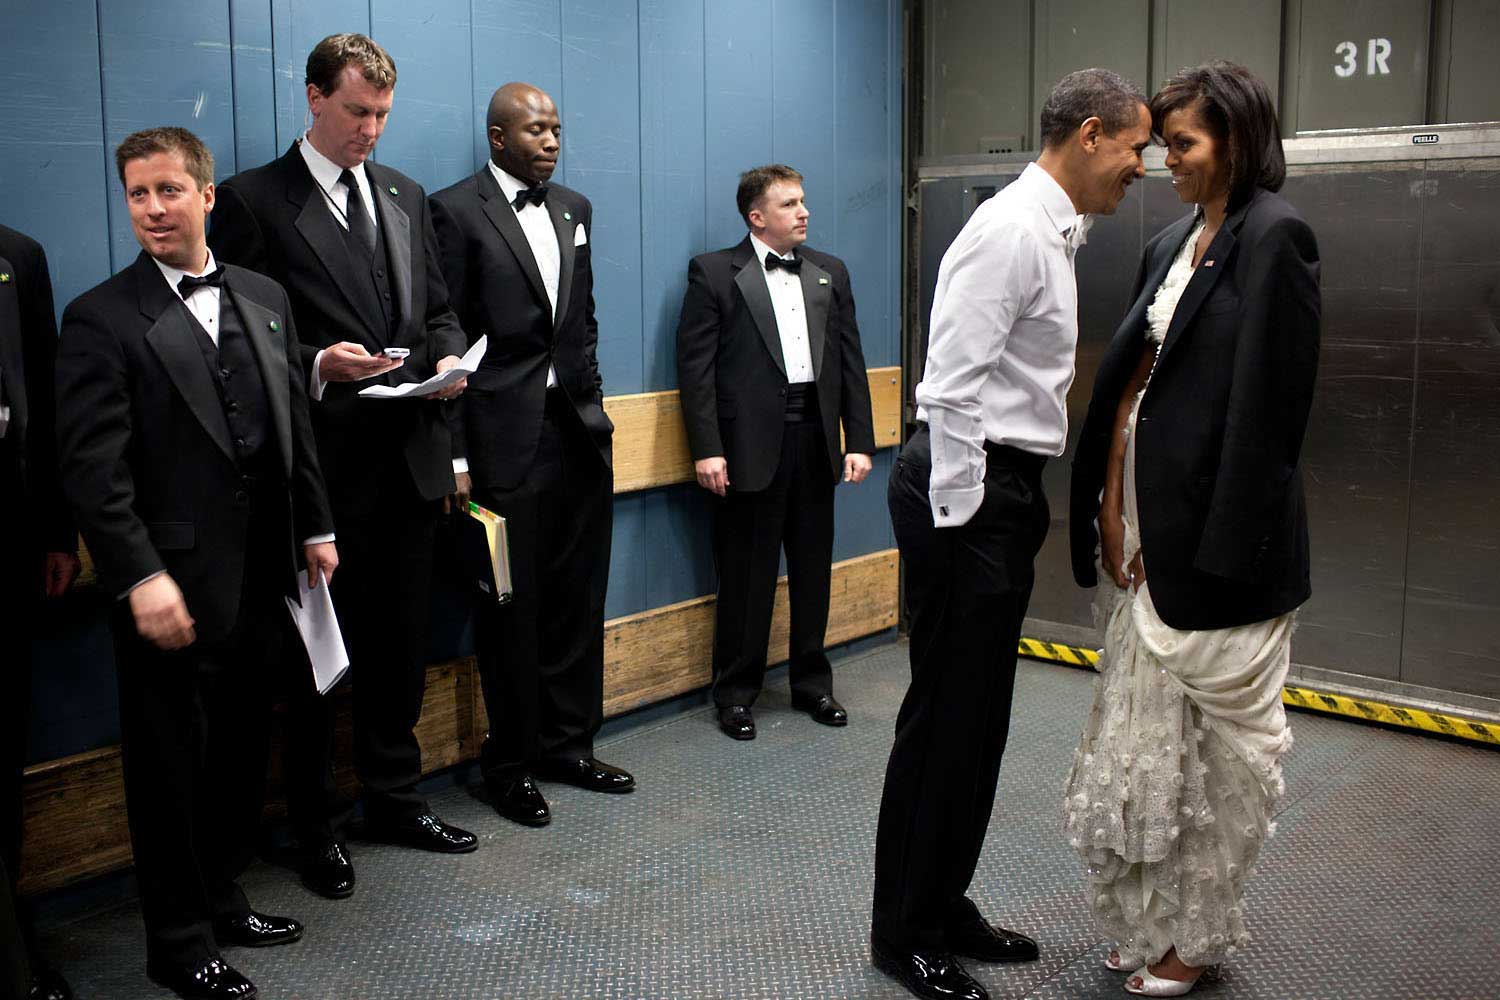 “We were on a freight elevator headed to one of the Inaugural balls on Jan. 20, 2009. It was quite chilly, so the President removed his tuxedo jacket and put it over the shoulders of his wife. Then they had a semi-private moment as staff members and Secret Service agents tried not to look.”